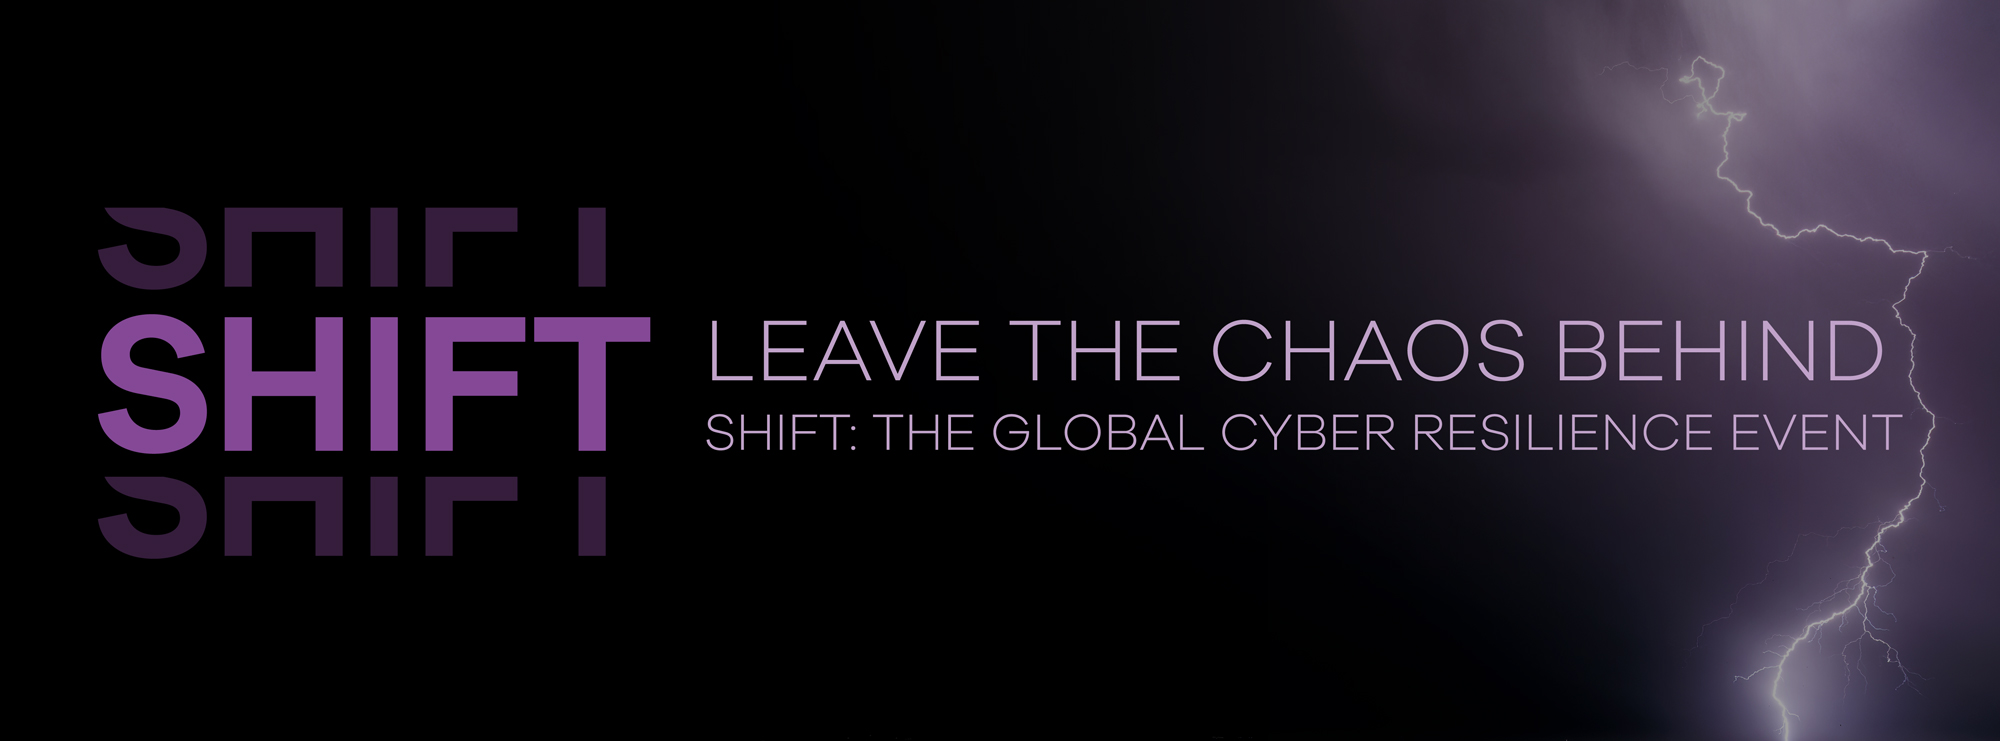 SHIFT - The Global Cyber Resilience Event